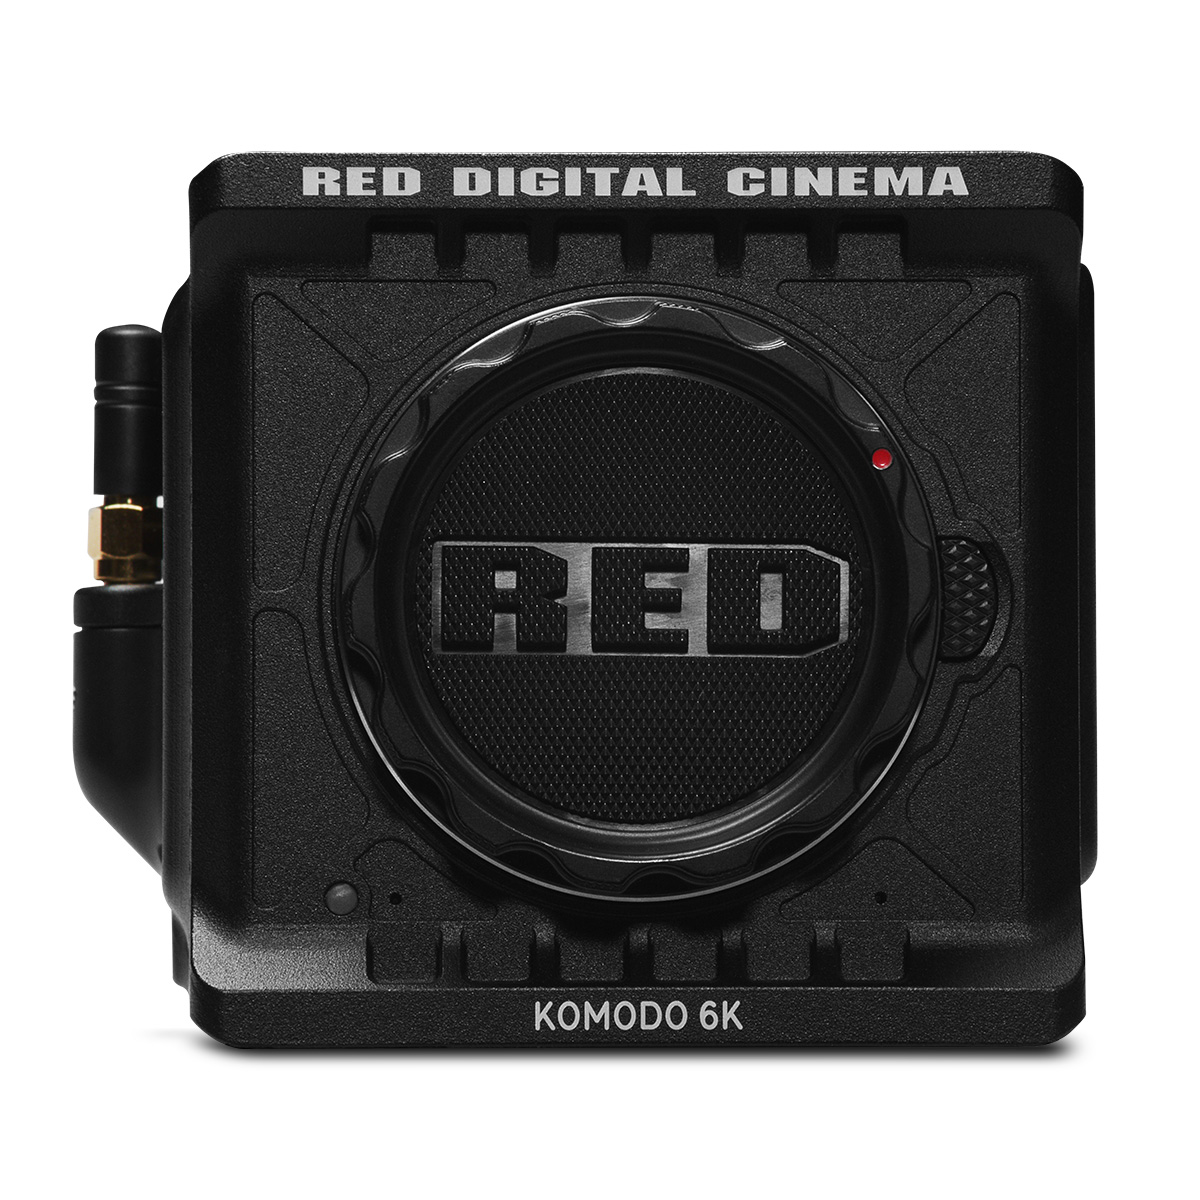 Major firmware update 1.7.0beta for RED Komodo brings GioScope and more